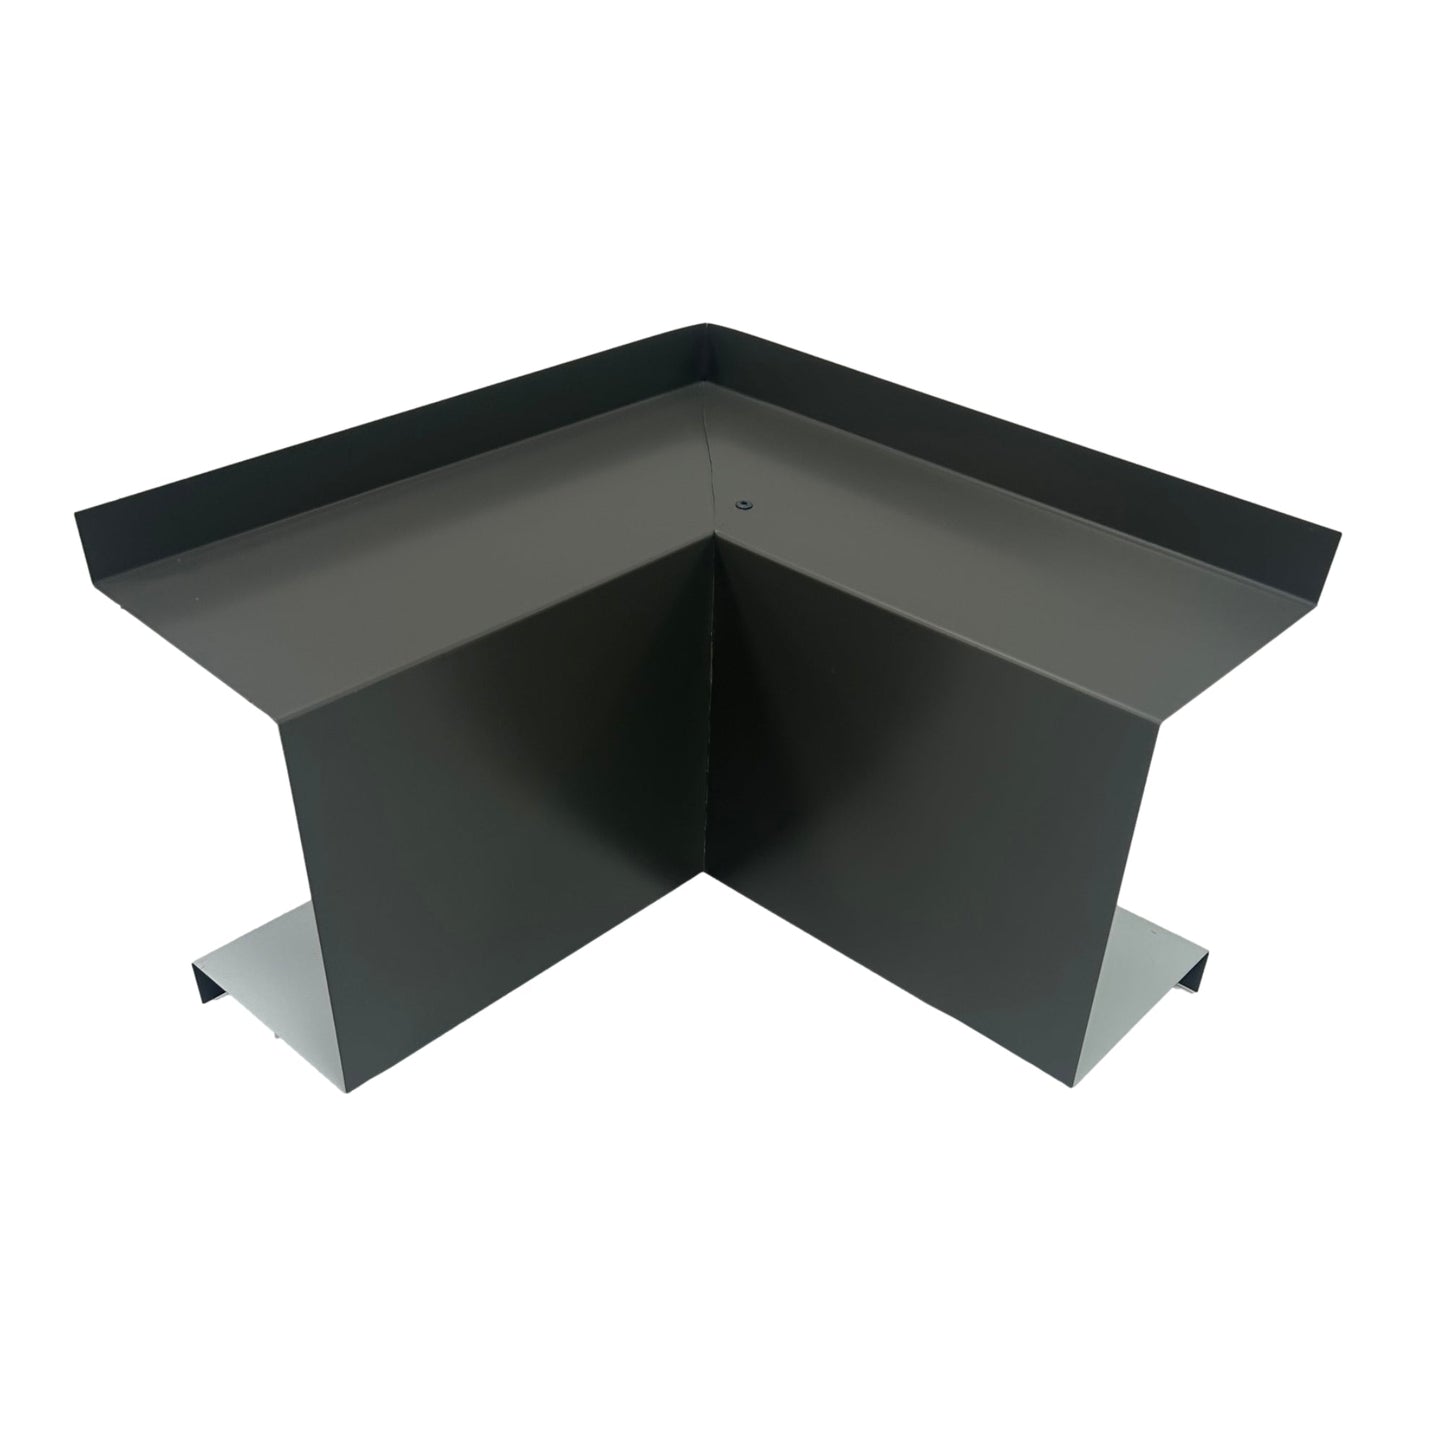 A folded black metal corner gutter piece with two flat sides forming a right angle, similar to Residential Series - Line Set Cover Inside Corner Elbows - Premium Quality from Perma Cover used in HVAC installations. There is a small screw with a washer at the intersection point of the two sides. The piece is designed for roofing or gutter systems to manage rainwater flow.